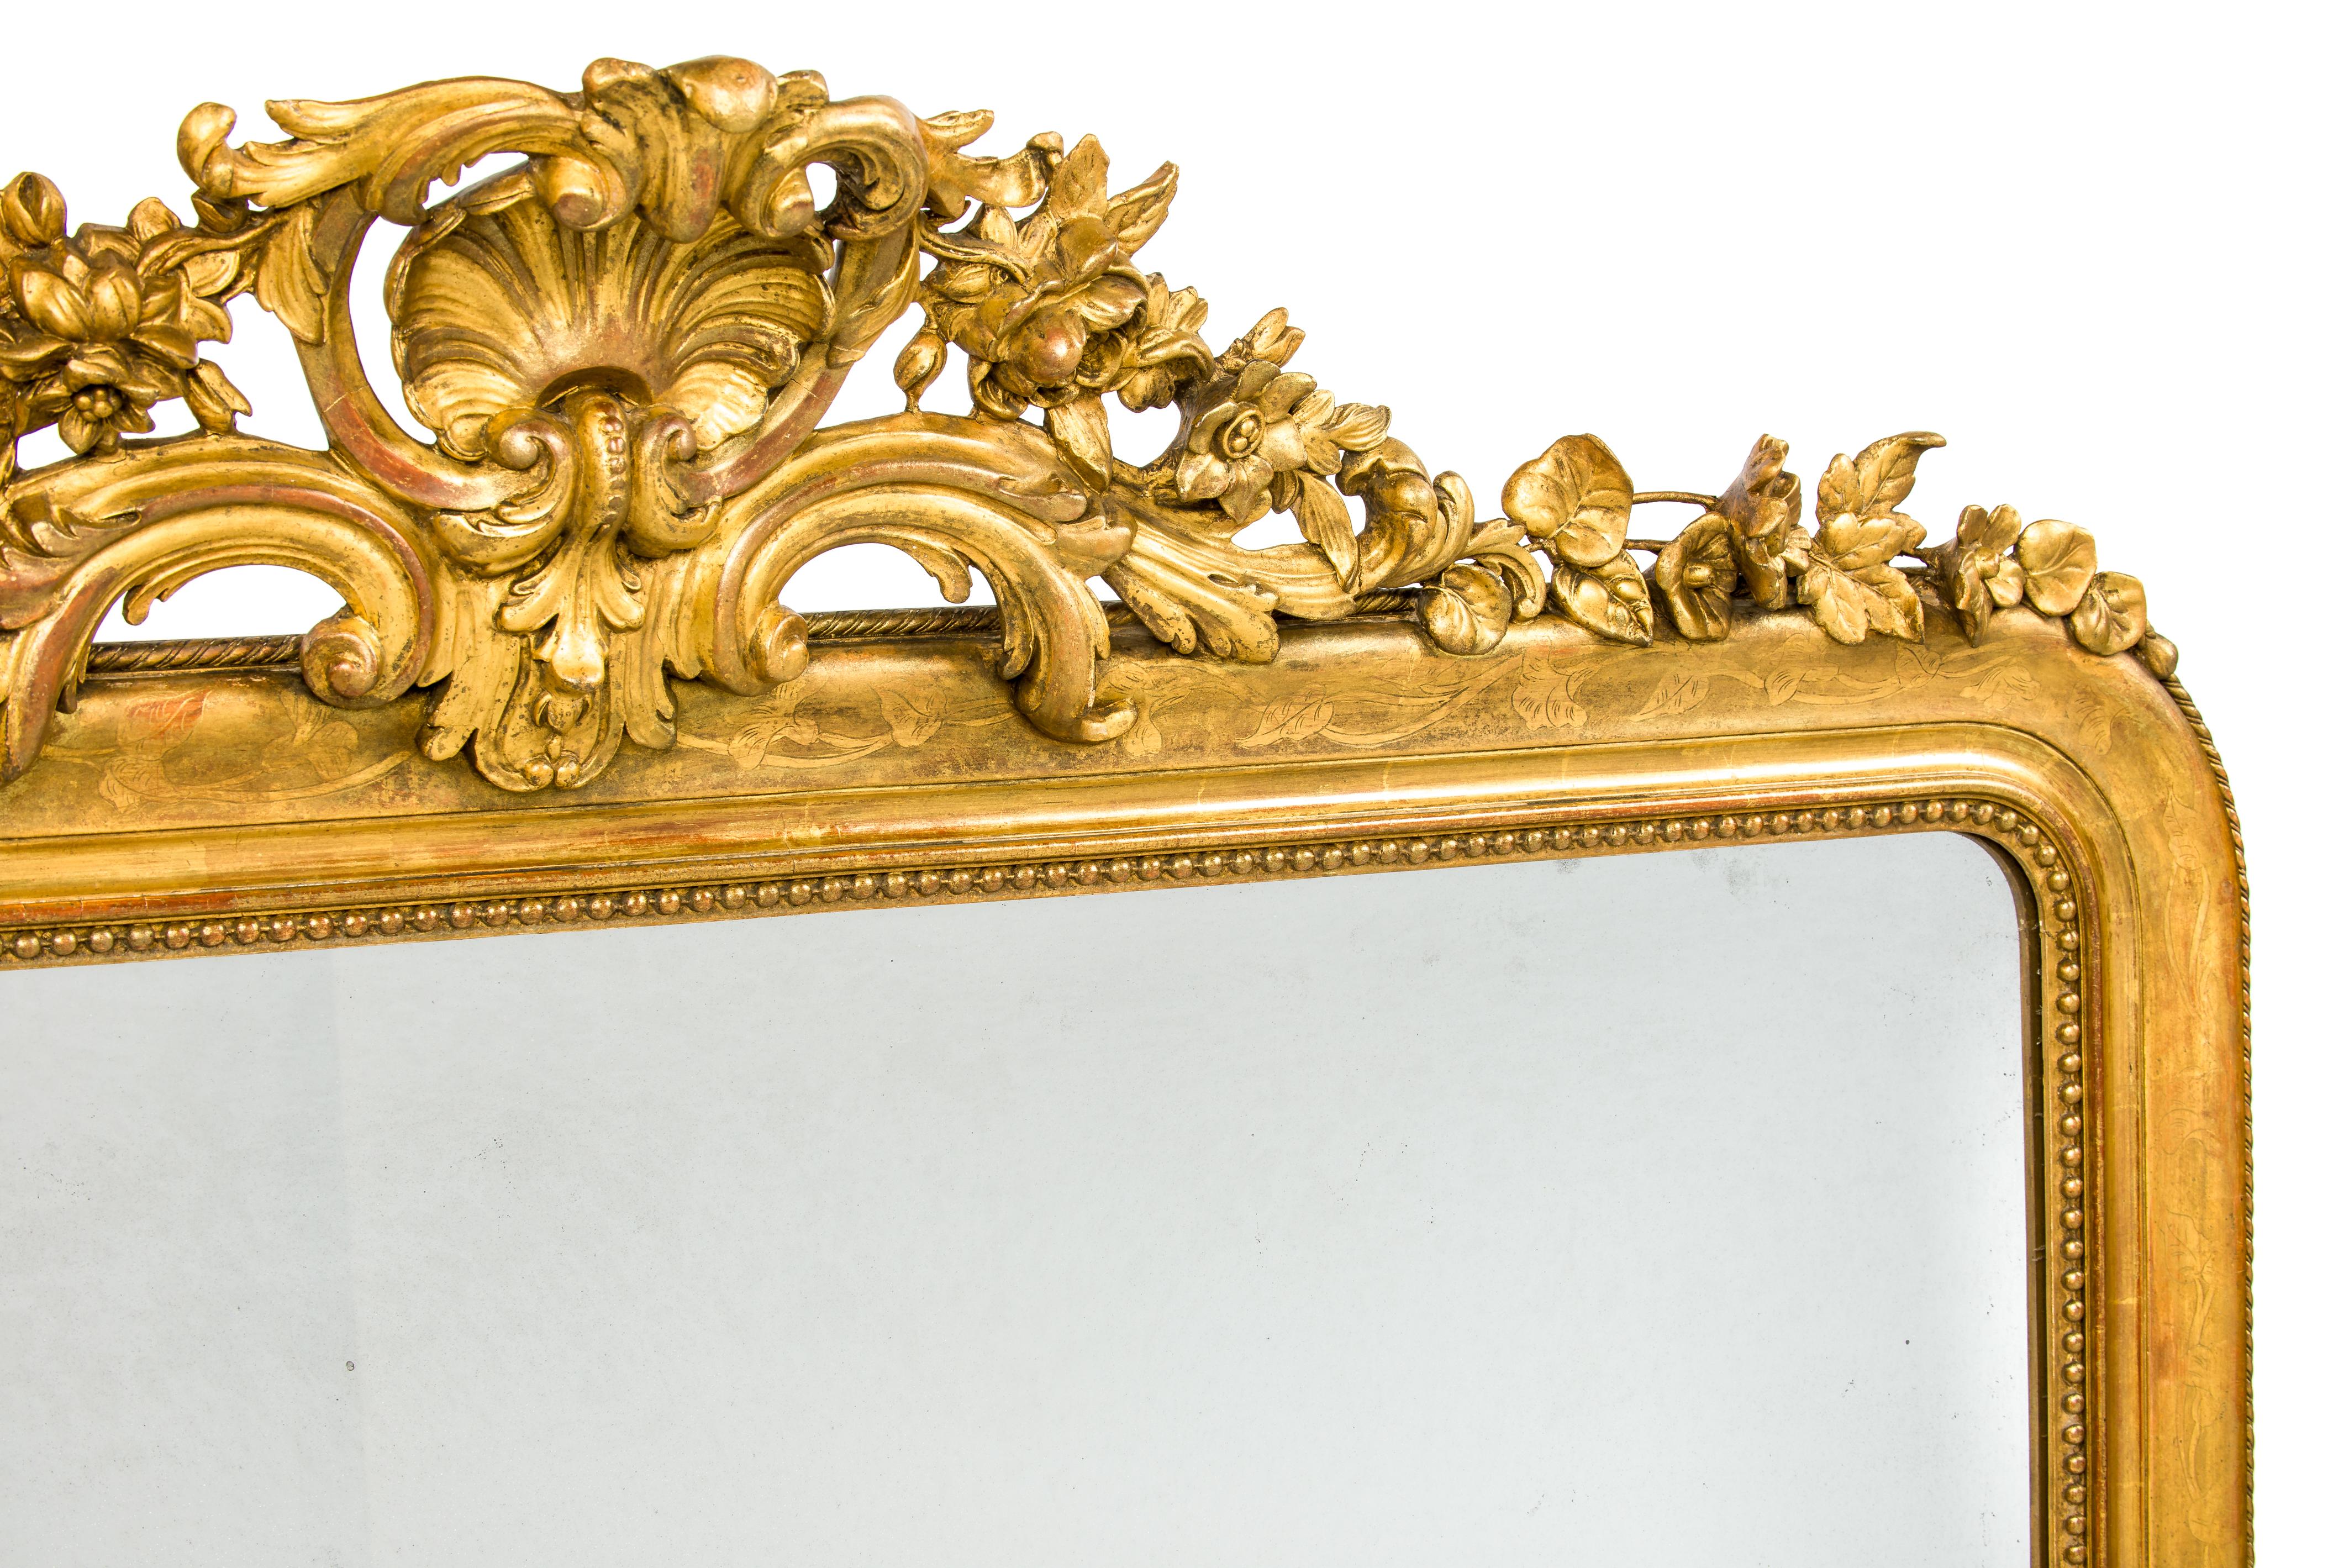 An impressive and unique gold leaf gilt mirror was made in France circa 1850. The mirror is horizontal oriented as opposed to the 99% of vertical oriented French mirrors. The mirror frame was decorated with an elaborate crest, depicting a central